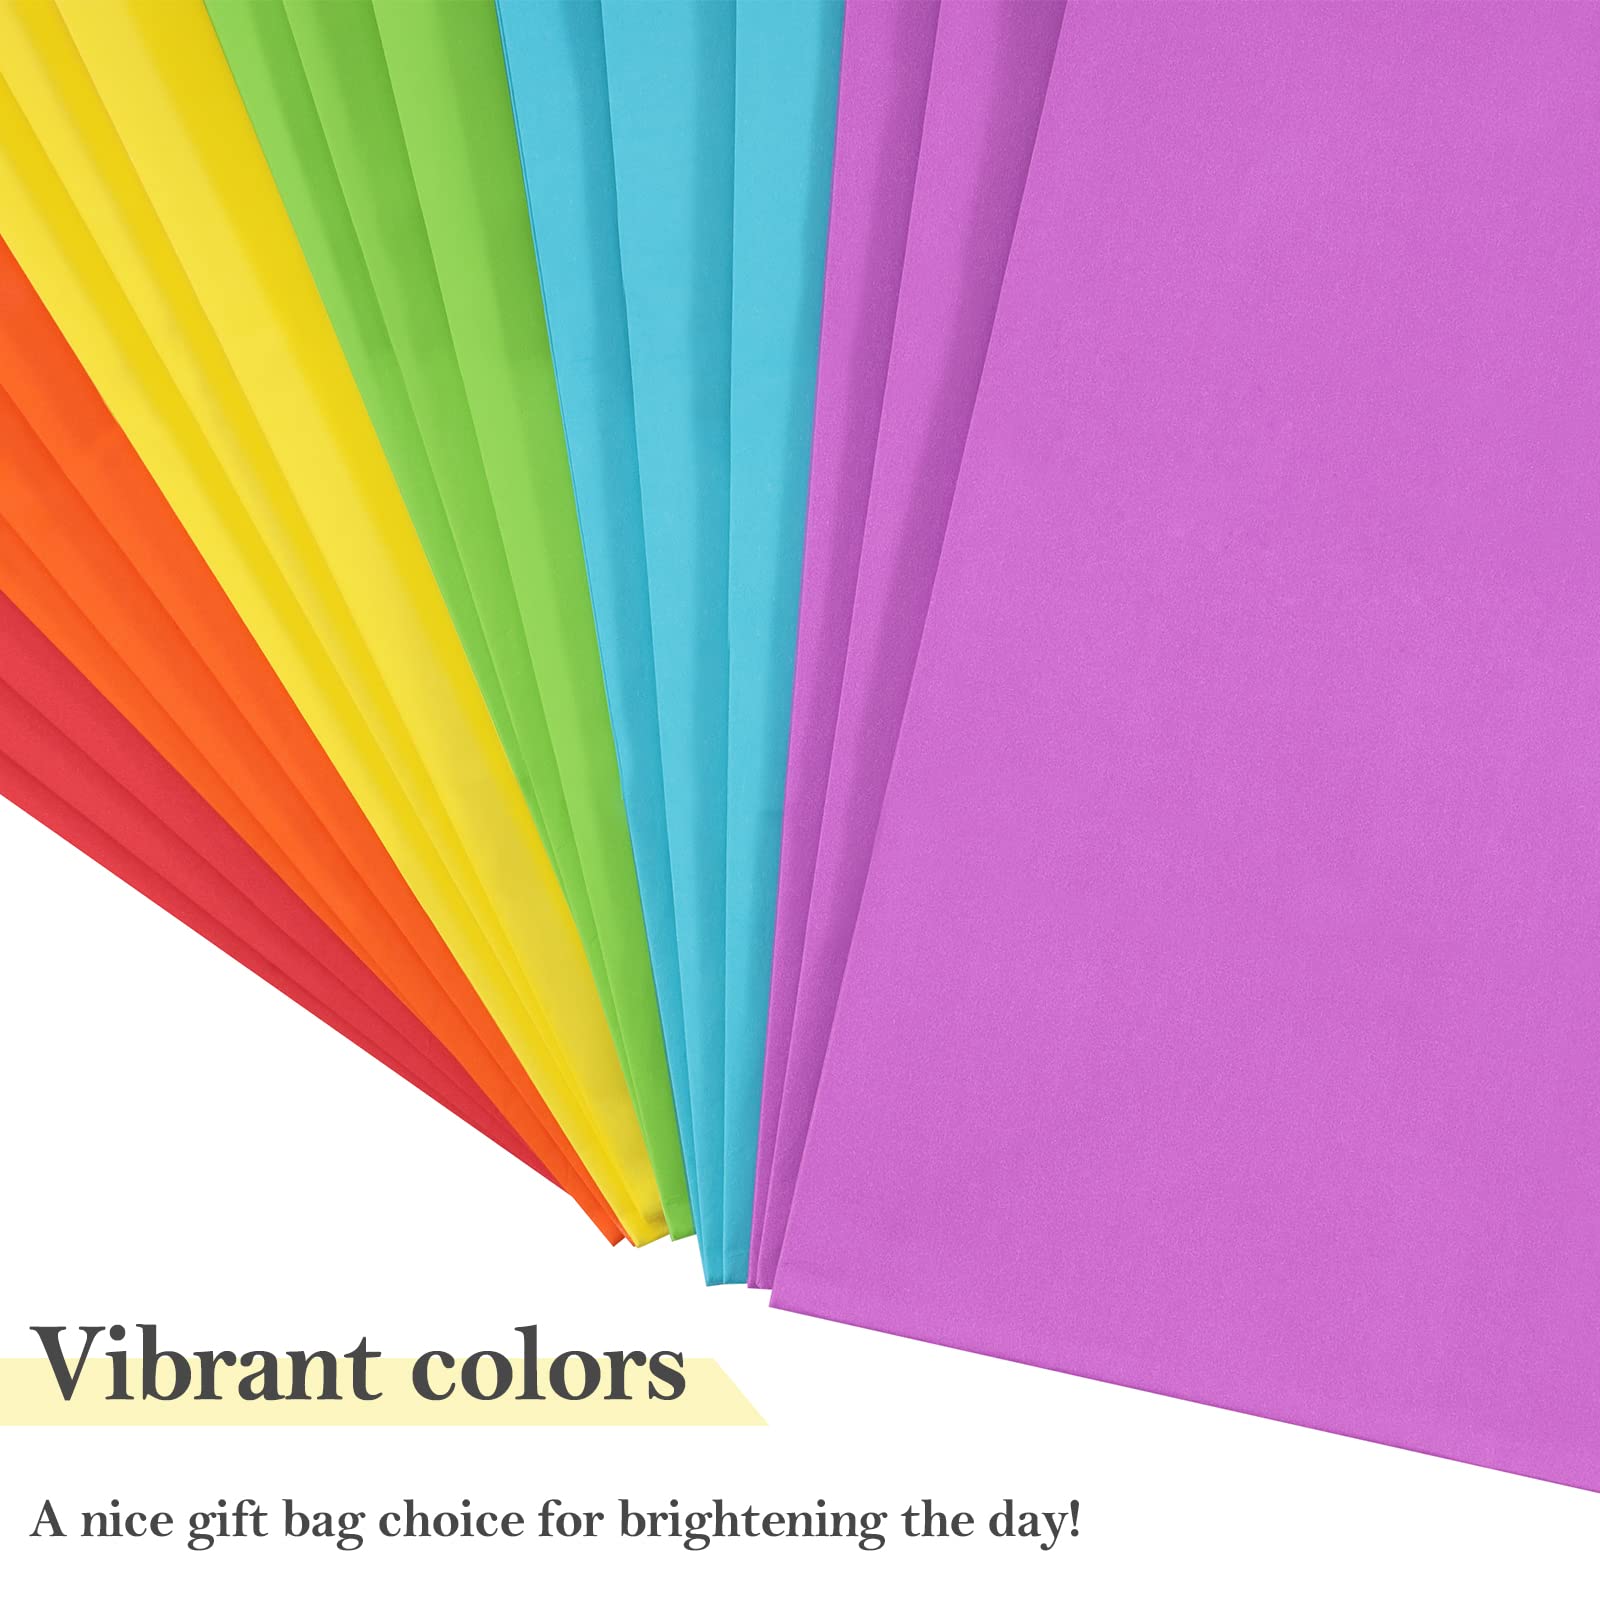 BagDream 48 Pieces 10x5x13 Assorted Gift Bags Rainbow Colors Kraft Paper Party Favor Gift Bags with Handles for Wedding, Baby Shower, Birthday, Gifts, Shopping and Party Supplies